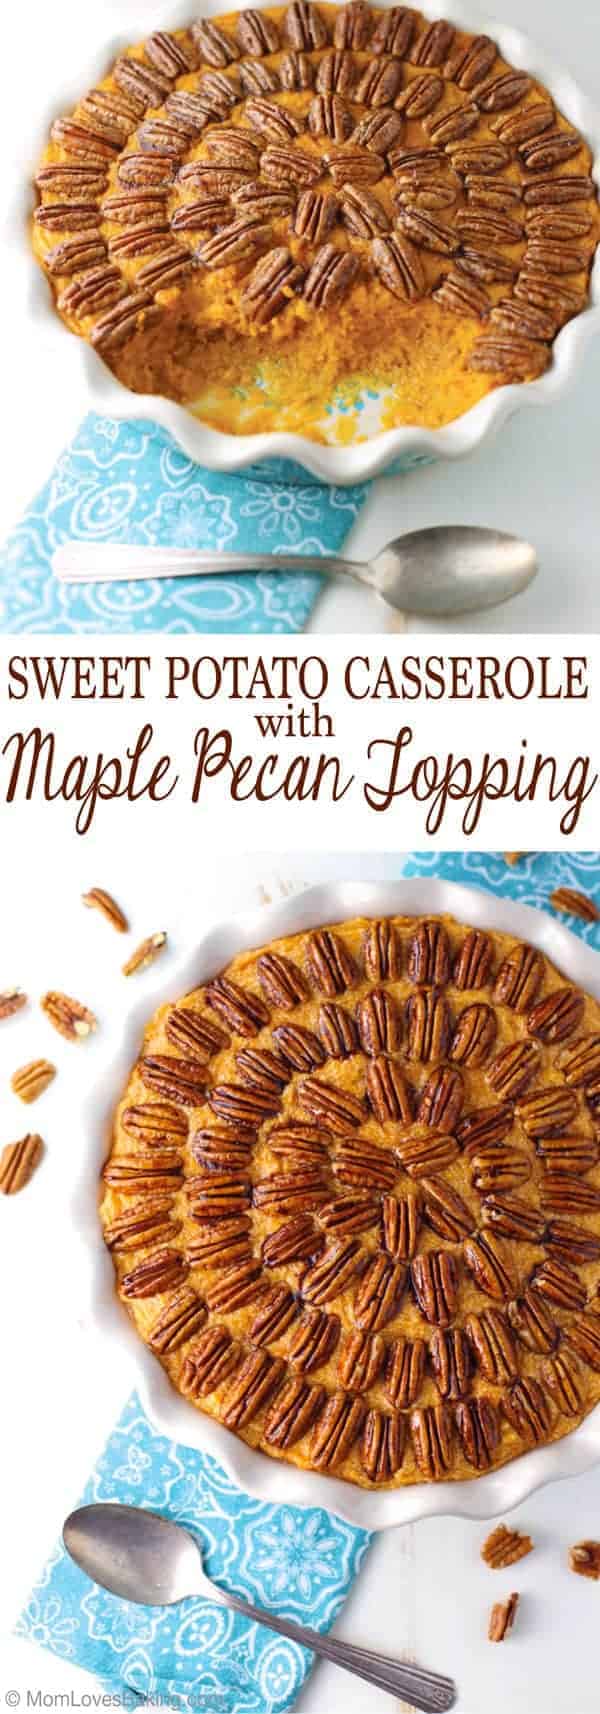 Sweet Potato Casserole with Maple Pecan Topping